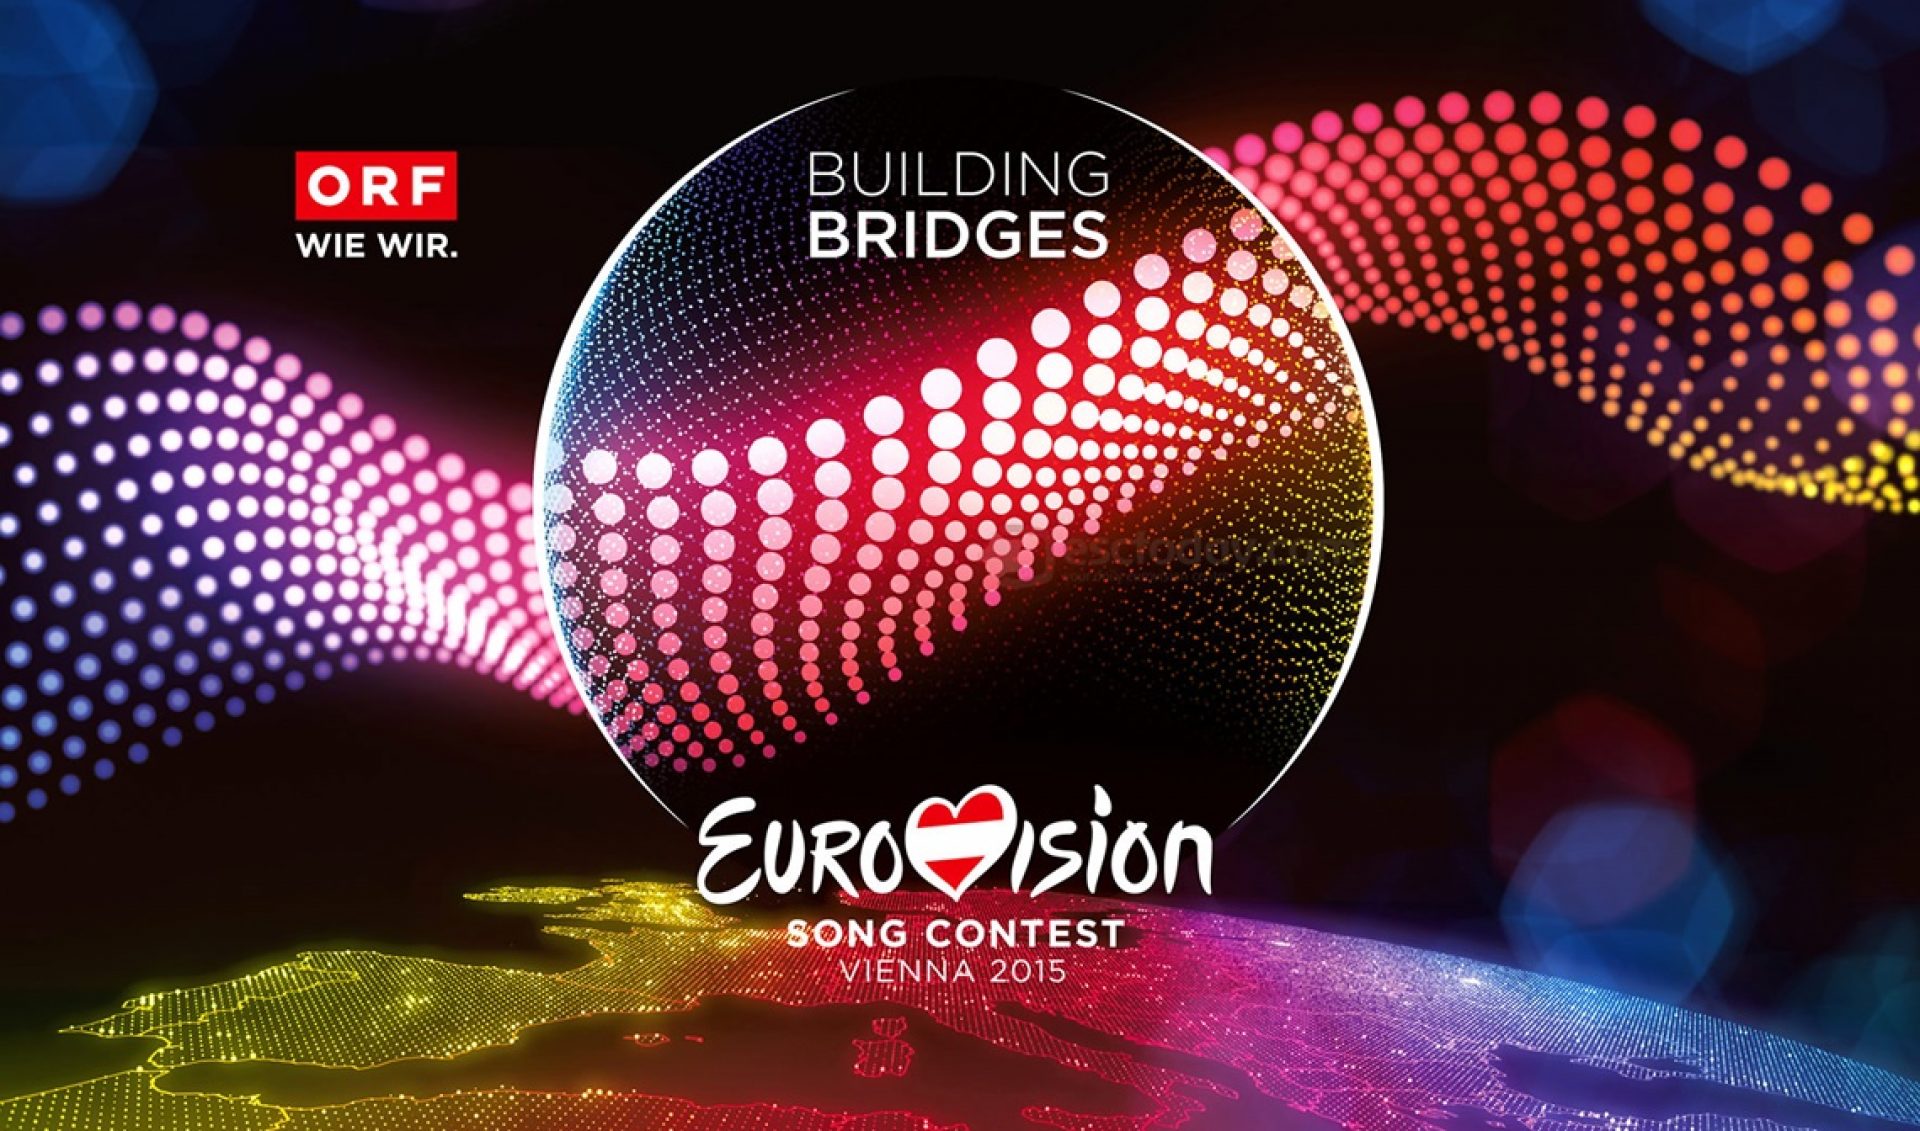 YouTube Serves As Live Streaming Home For Eurovision Song Contest